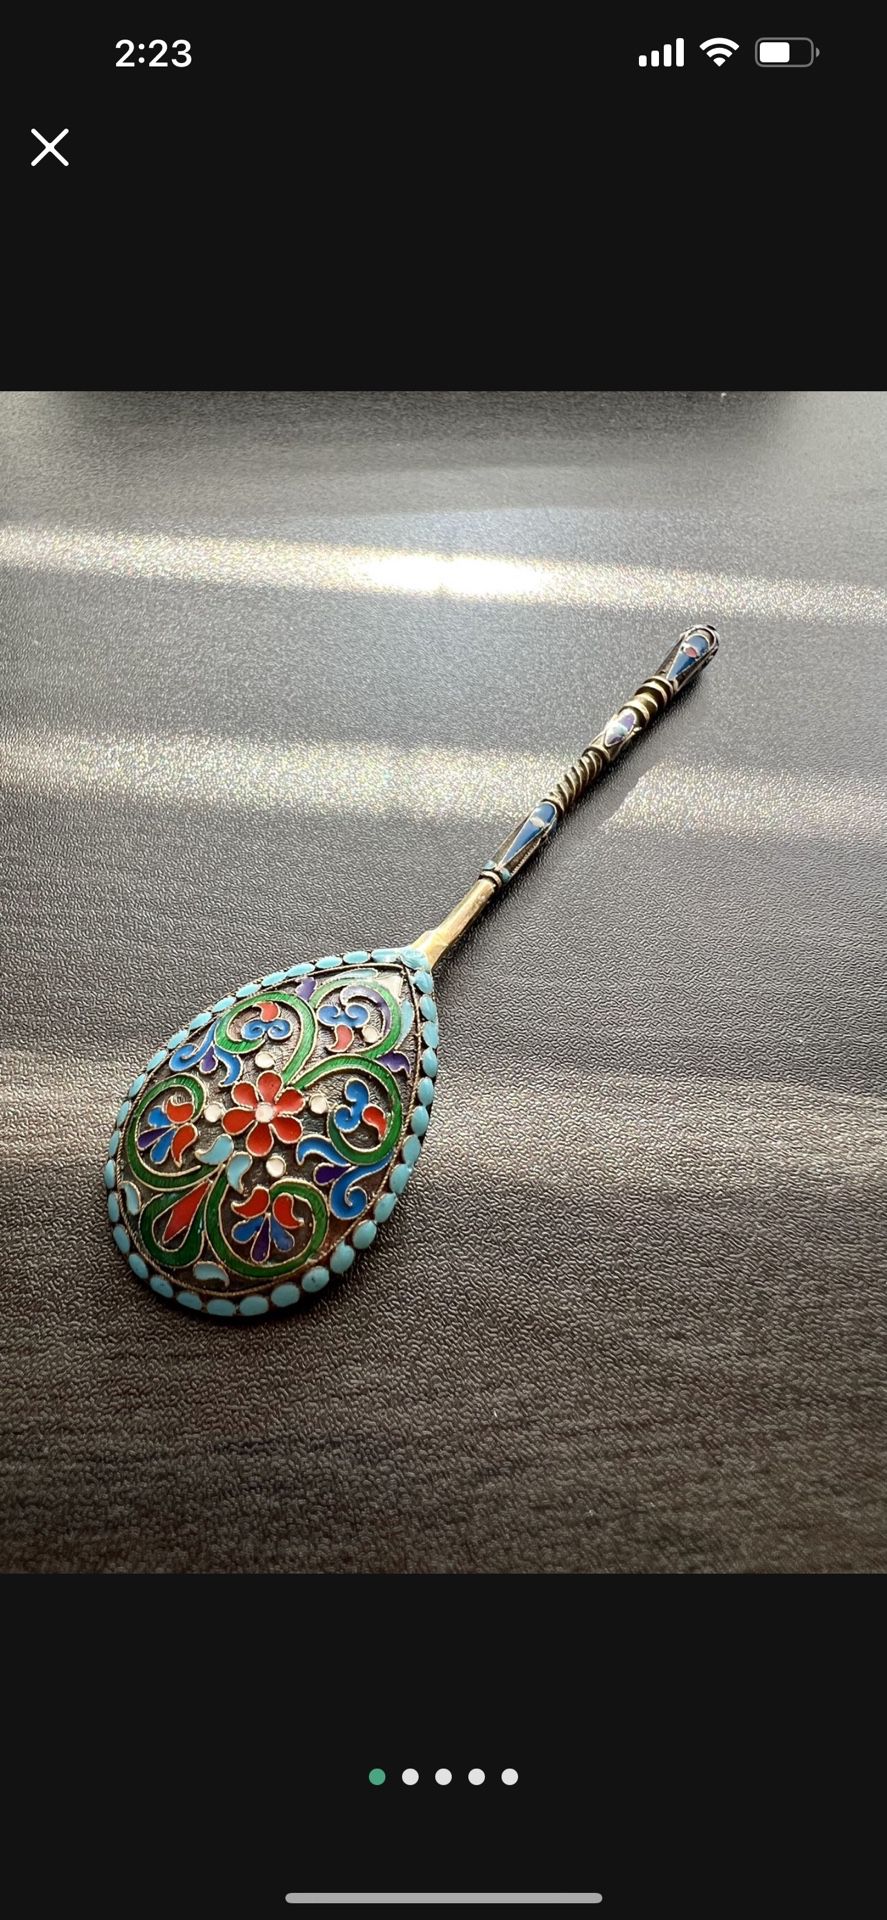 IMPERIAL RUSSIAN STERLING SILVER 84 JEWELED CLOISONNE ENAMEL 2 SPOON SET~ RARE ANTIQUE   EXCELLENT CONDITION 